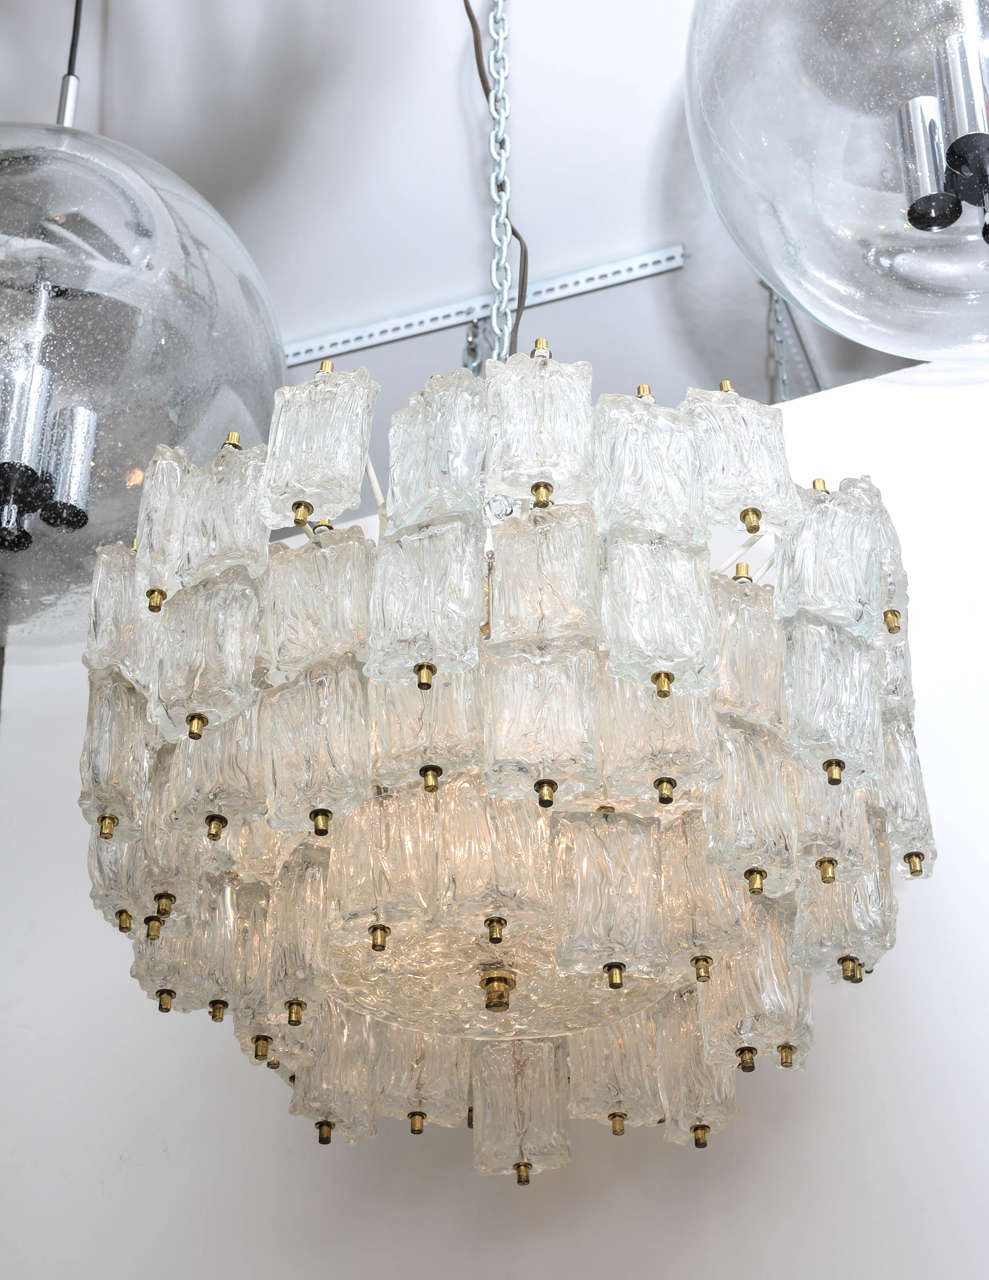 Murano glass multi-tiered chandeliers by Barovier e Toso with rectangular clear textured pendants supported by a white iron frame with brass hardware.